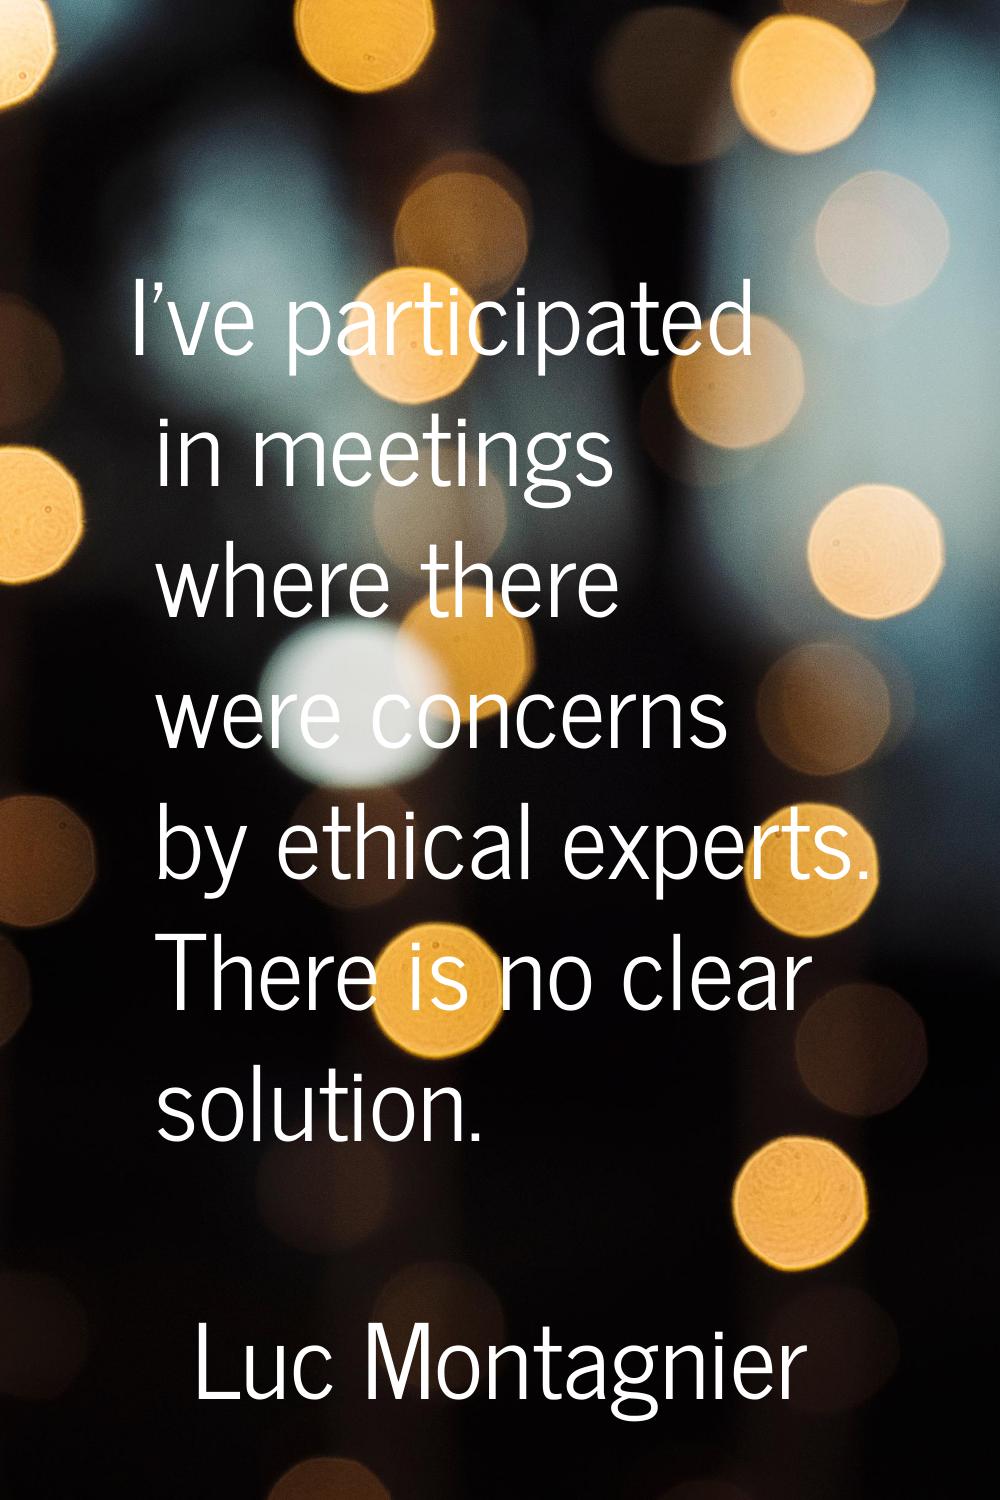 I've participated in meetings where there were concerns by ethical experts. There is no clear solut